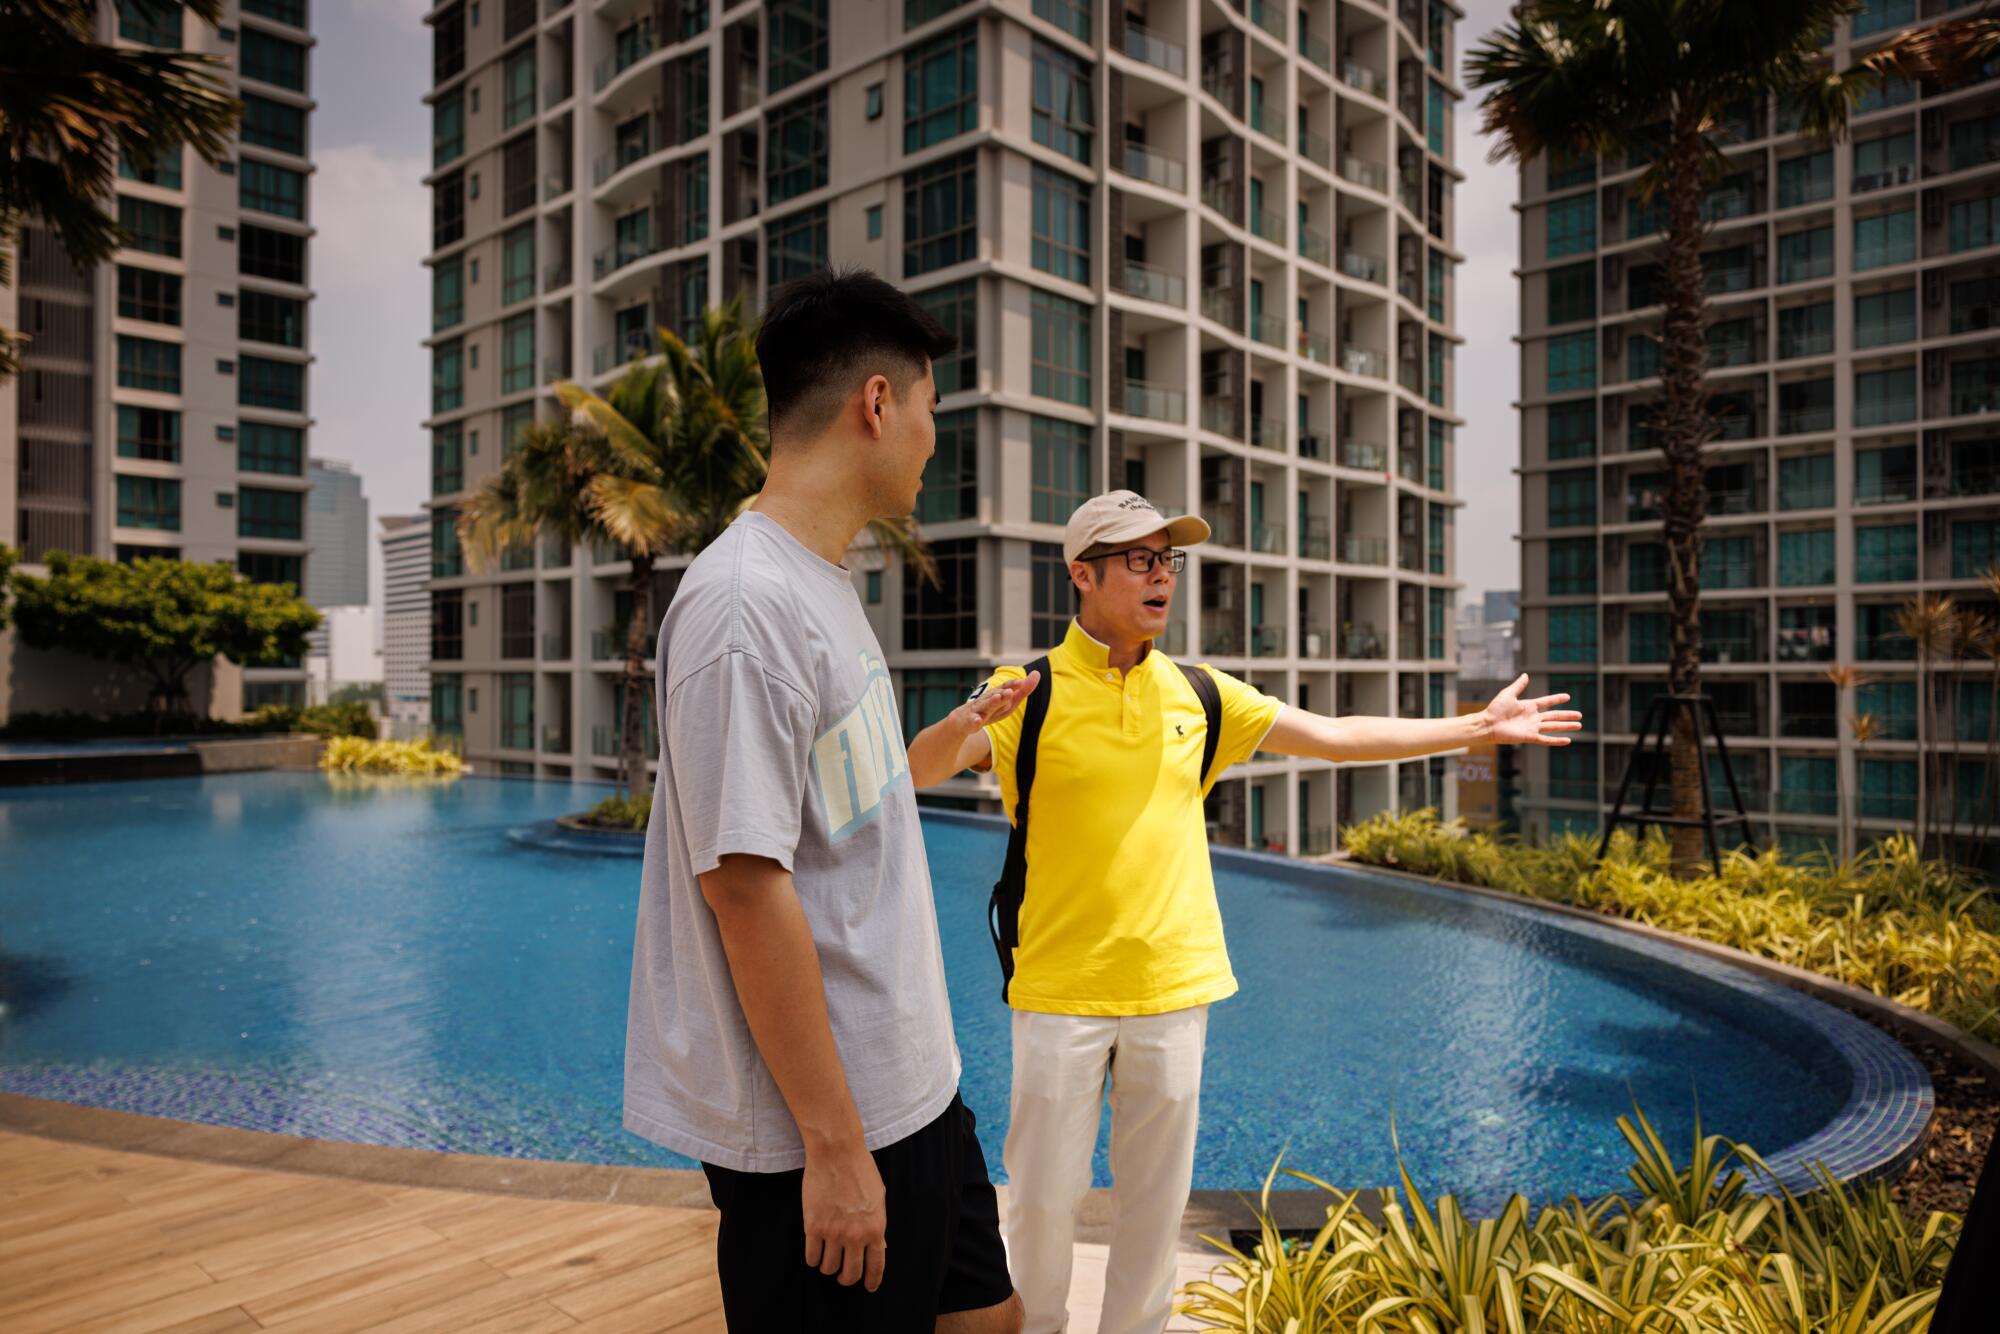 Prospective buyer, Danny Dong, 29, speaks with real estate agent, Owen Zhu, on the rooftop 